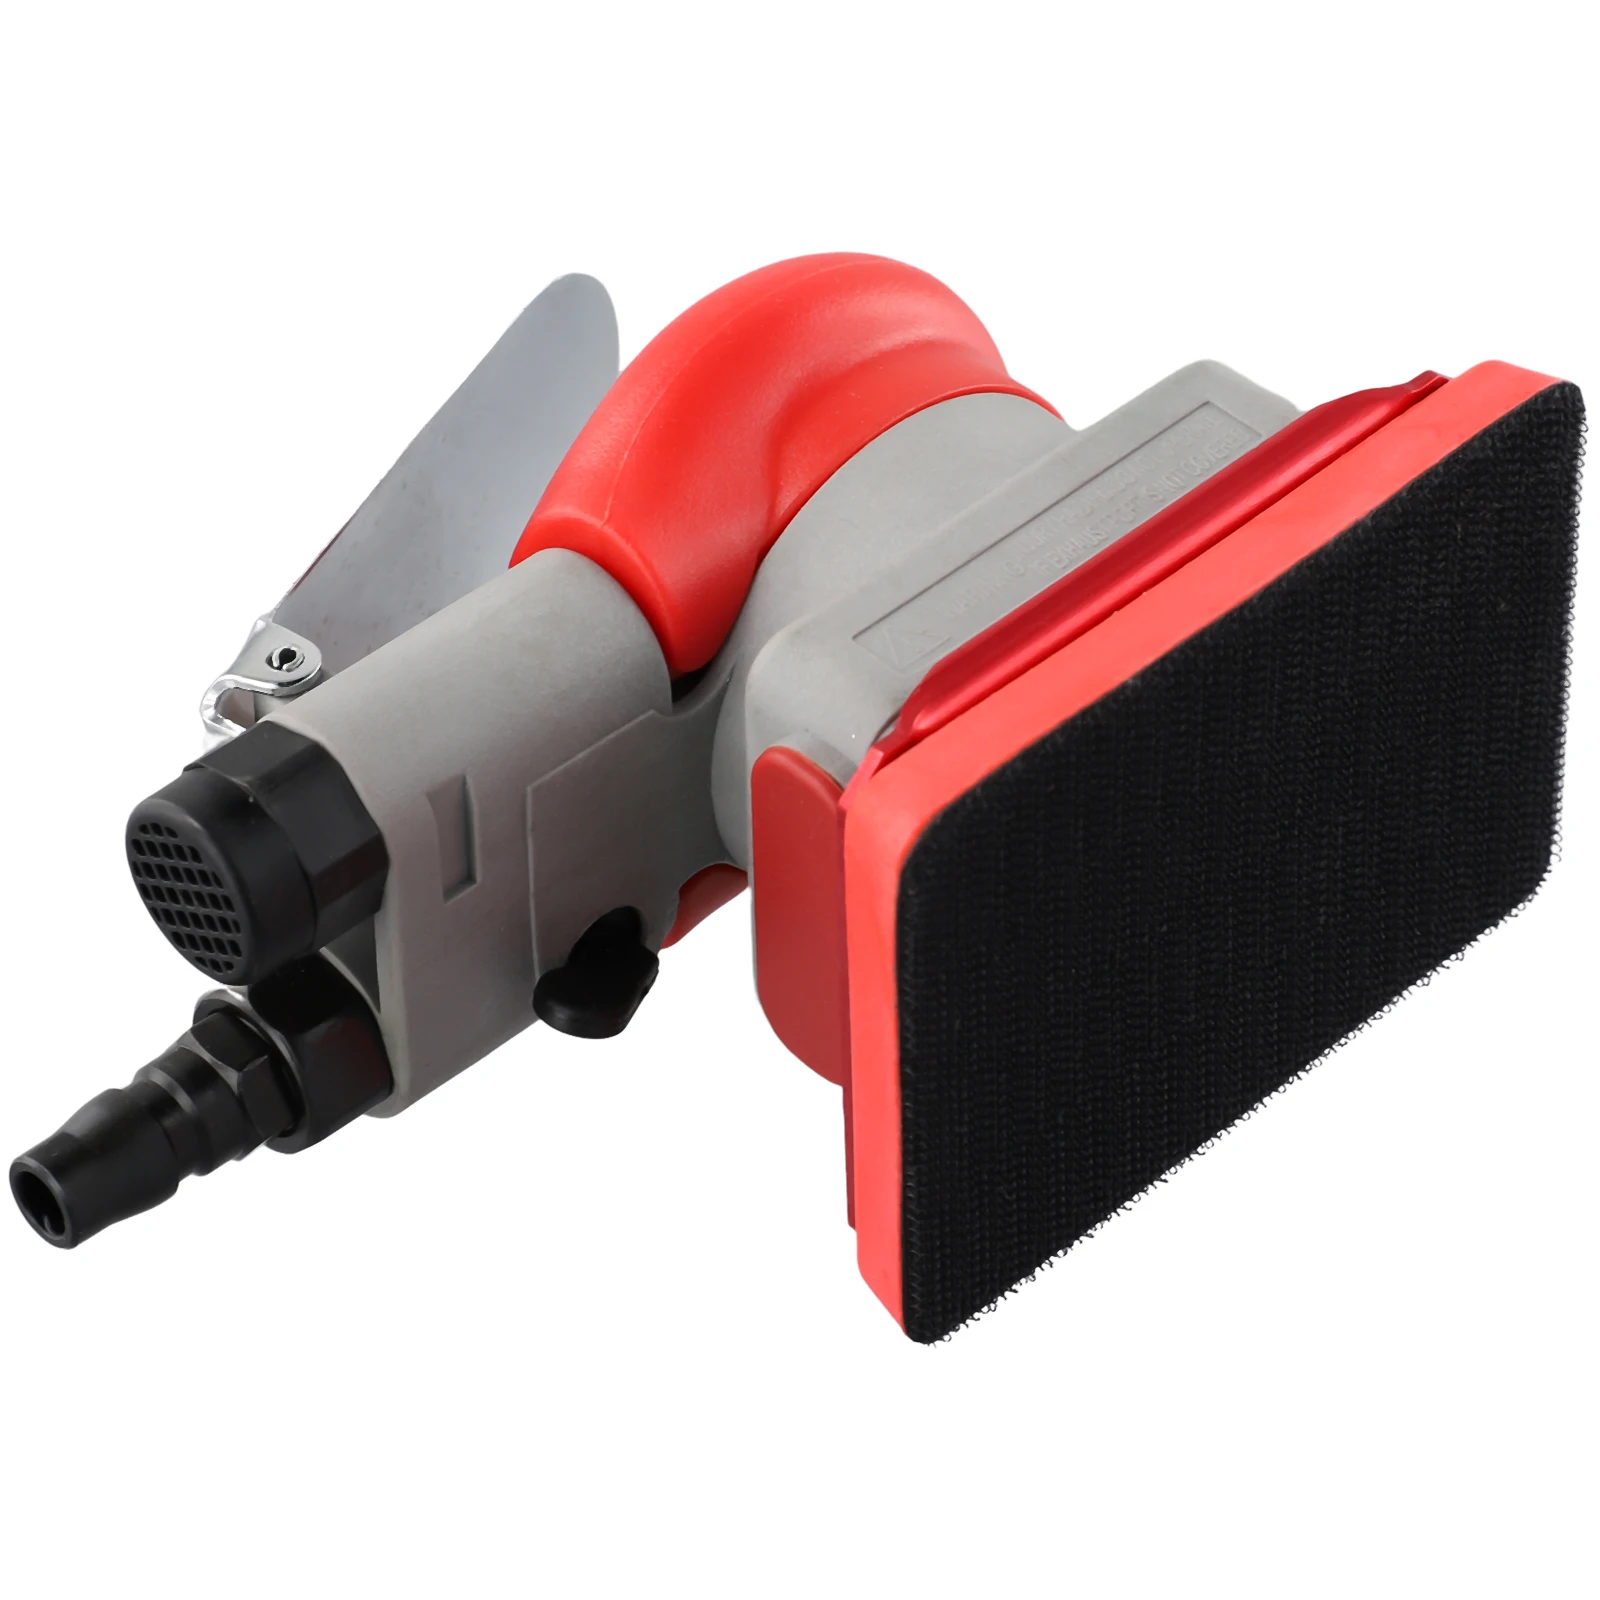 

Polishing Tools Pneumatic Sander Metal Grinding Rust Removal Square Woodworking Tools 1/4 Inch Air Inlet Joint